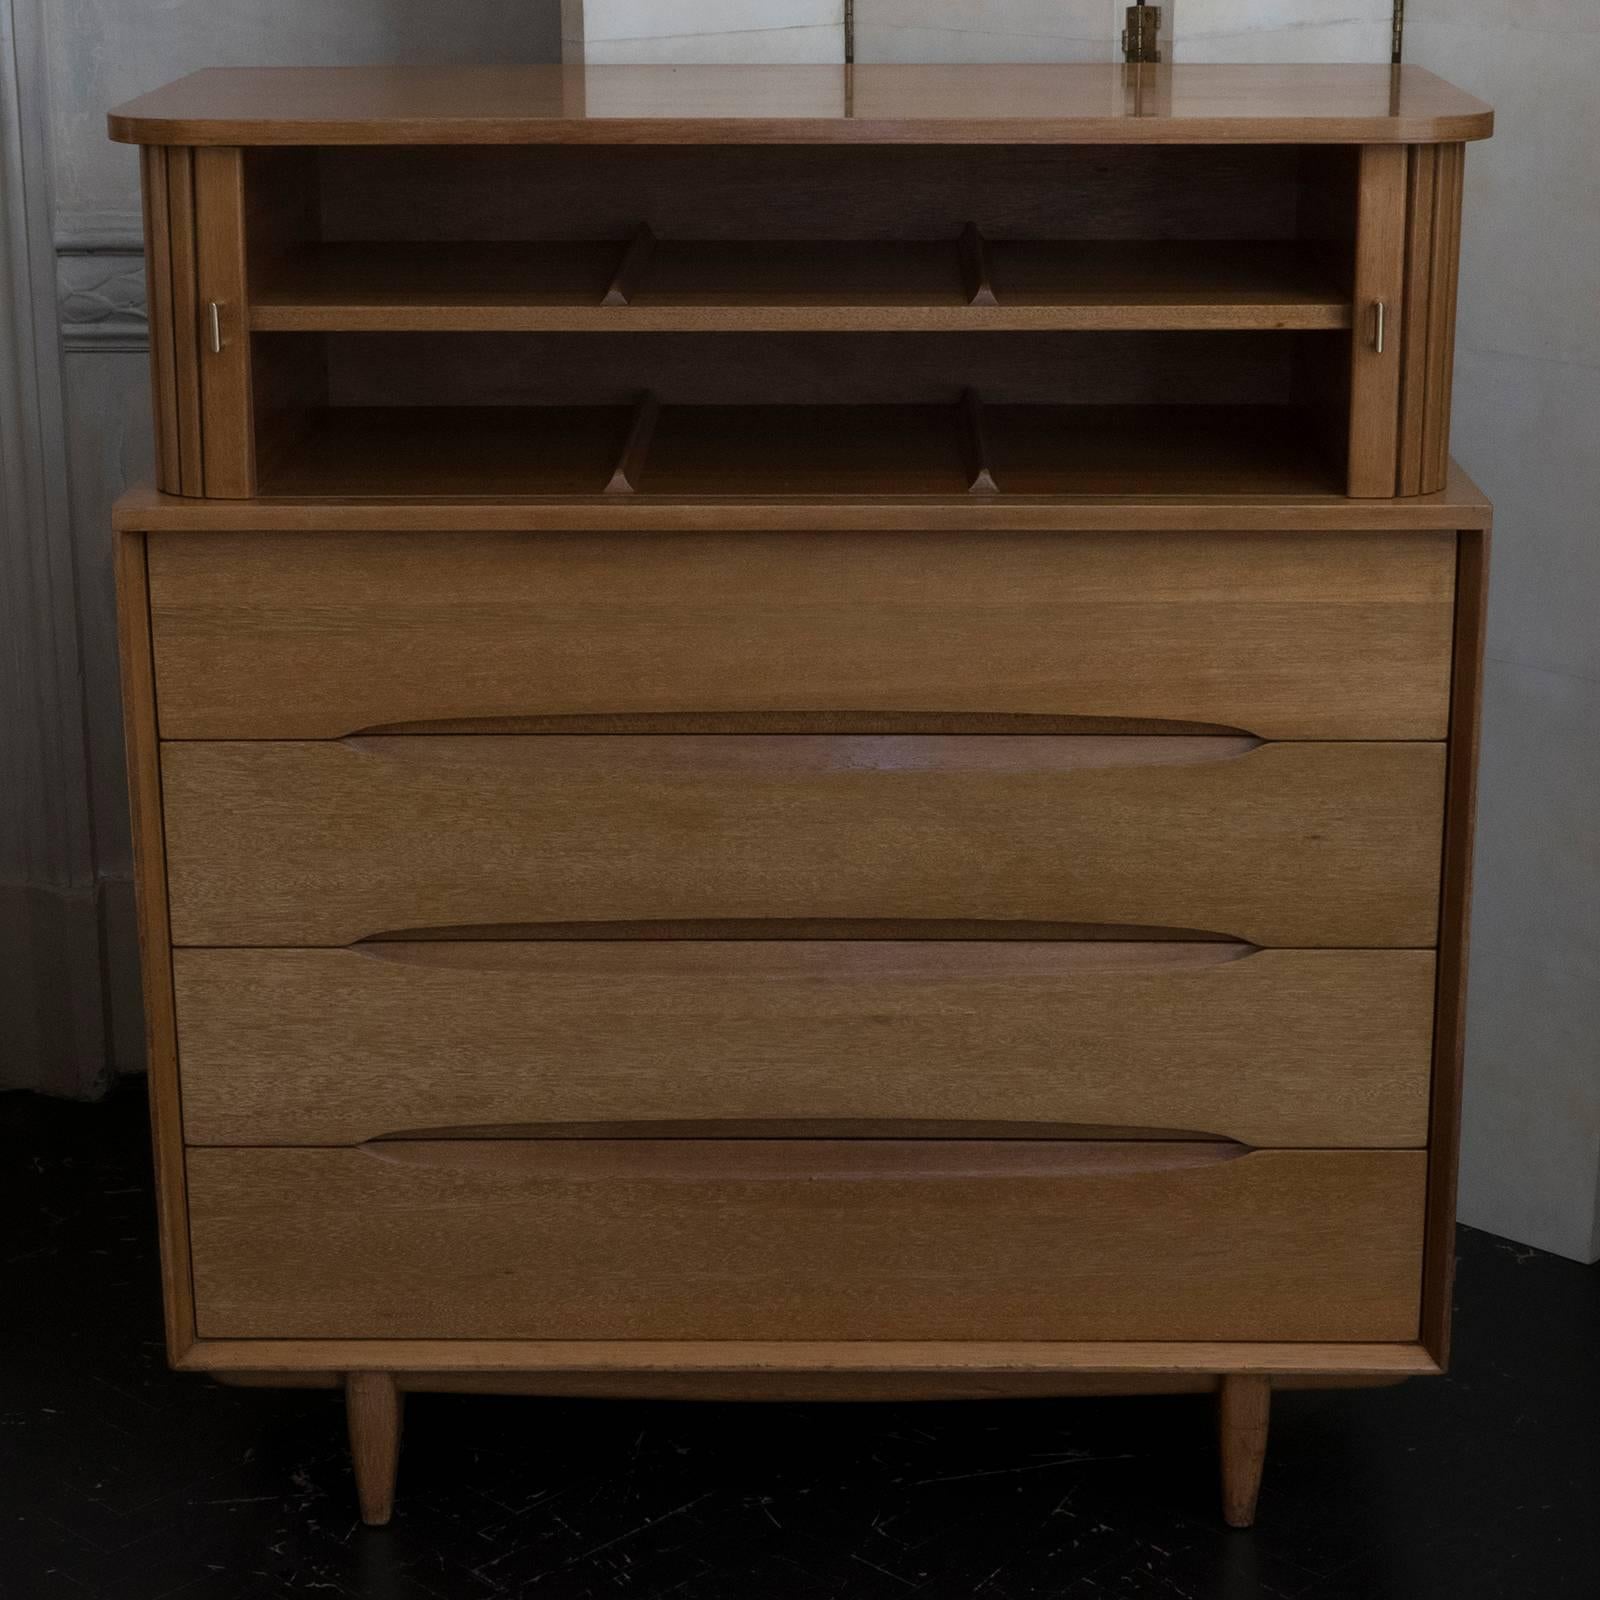 Tall chest in mahogany for Brown Saltman, 1950s. Four sculpted drawers, shelve behind tambour doors with brass pulls on top.